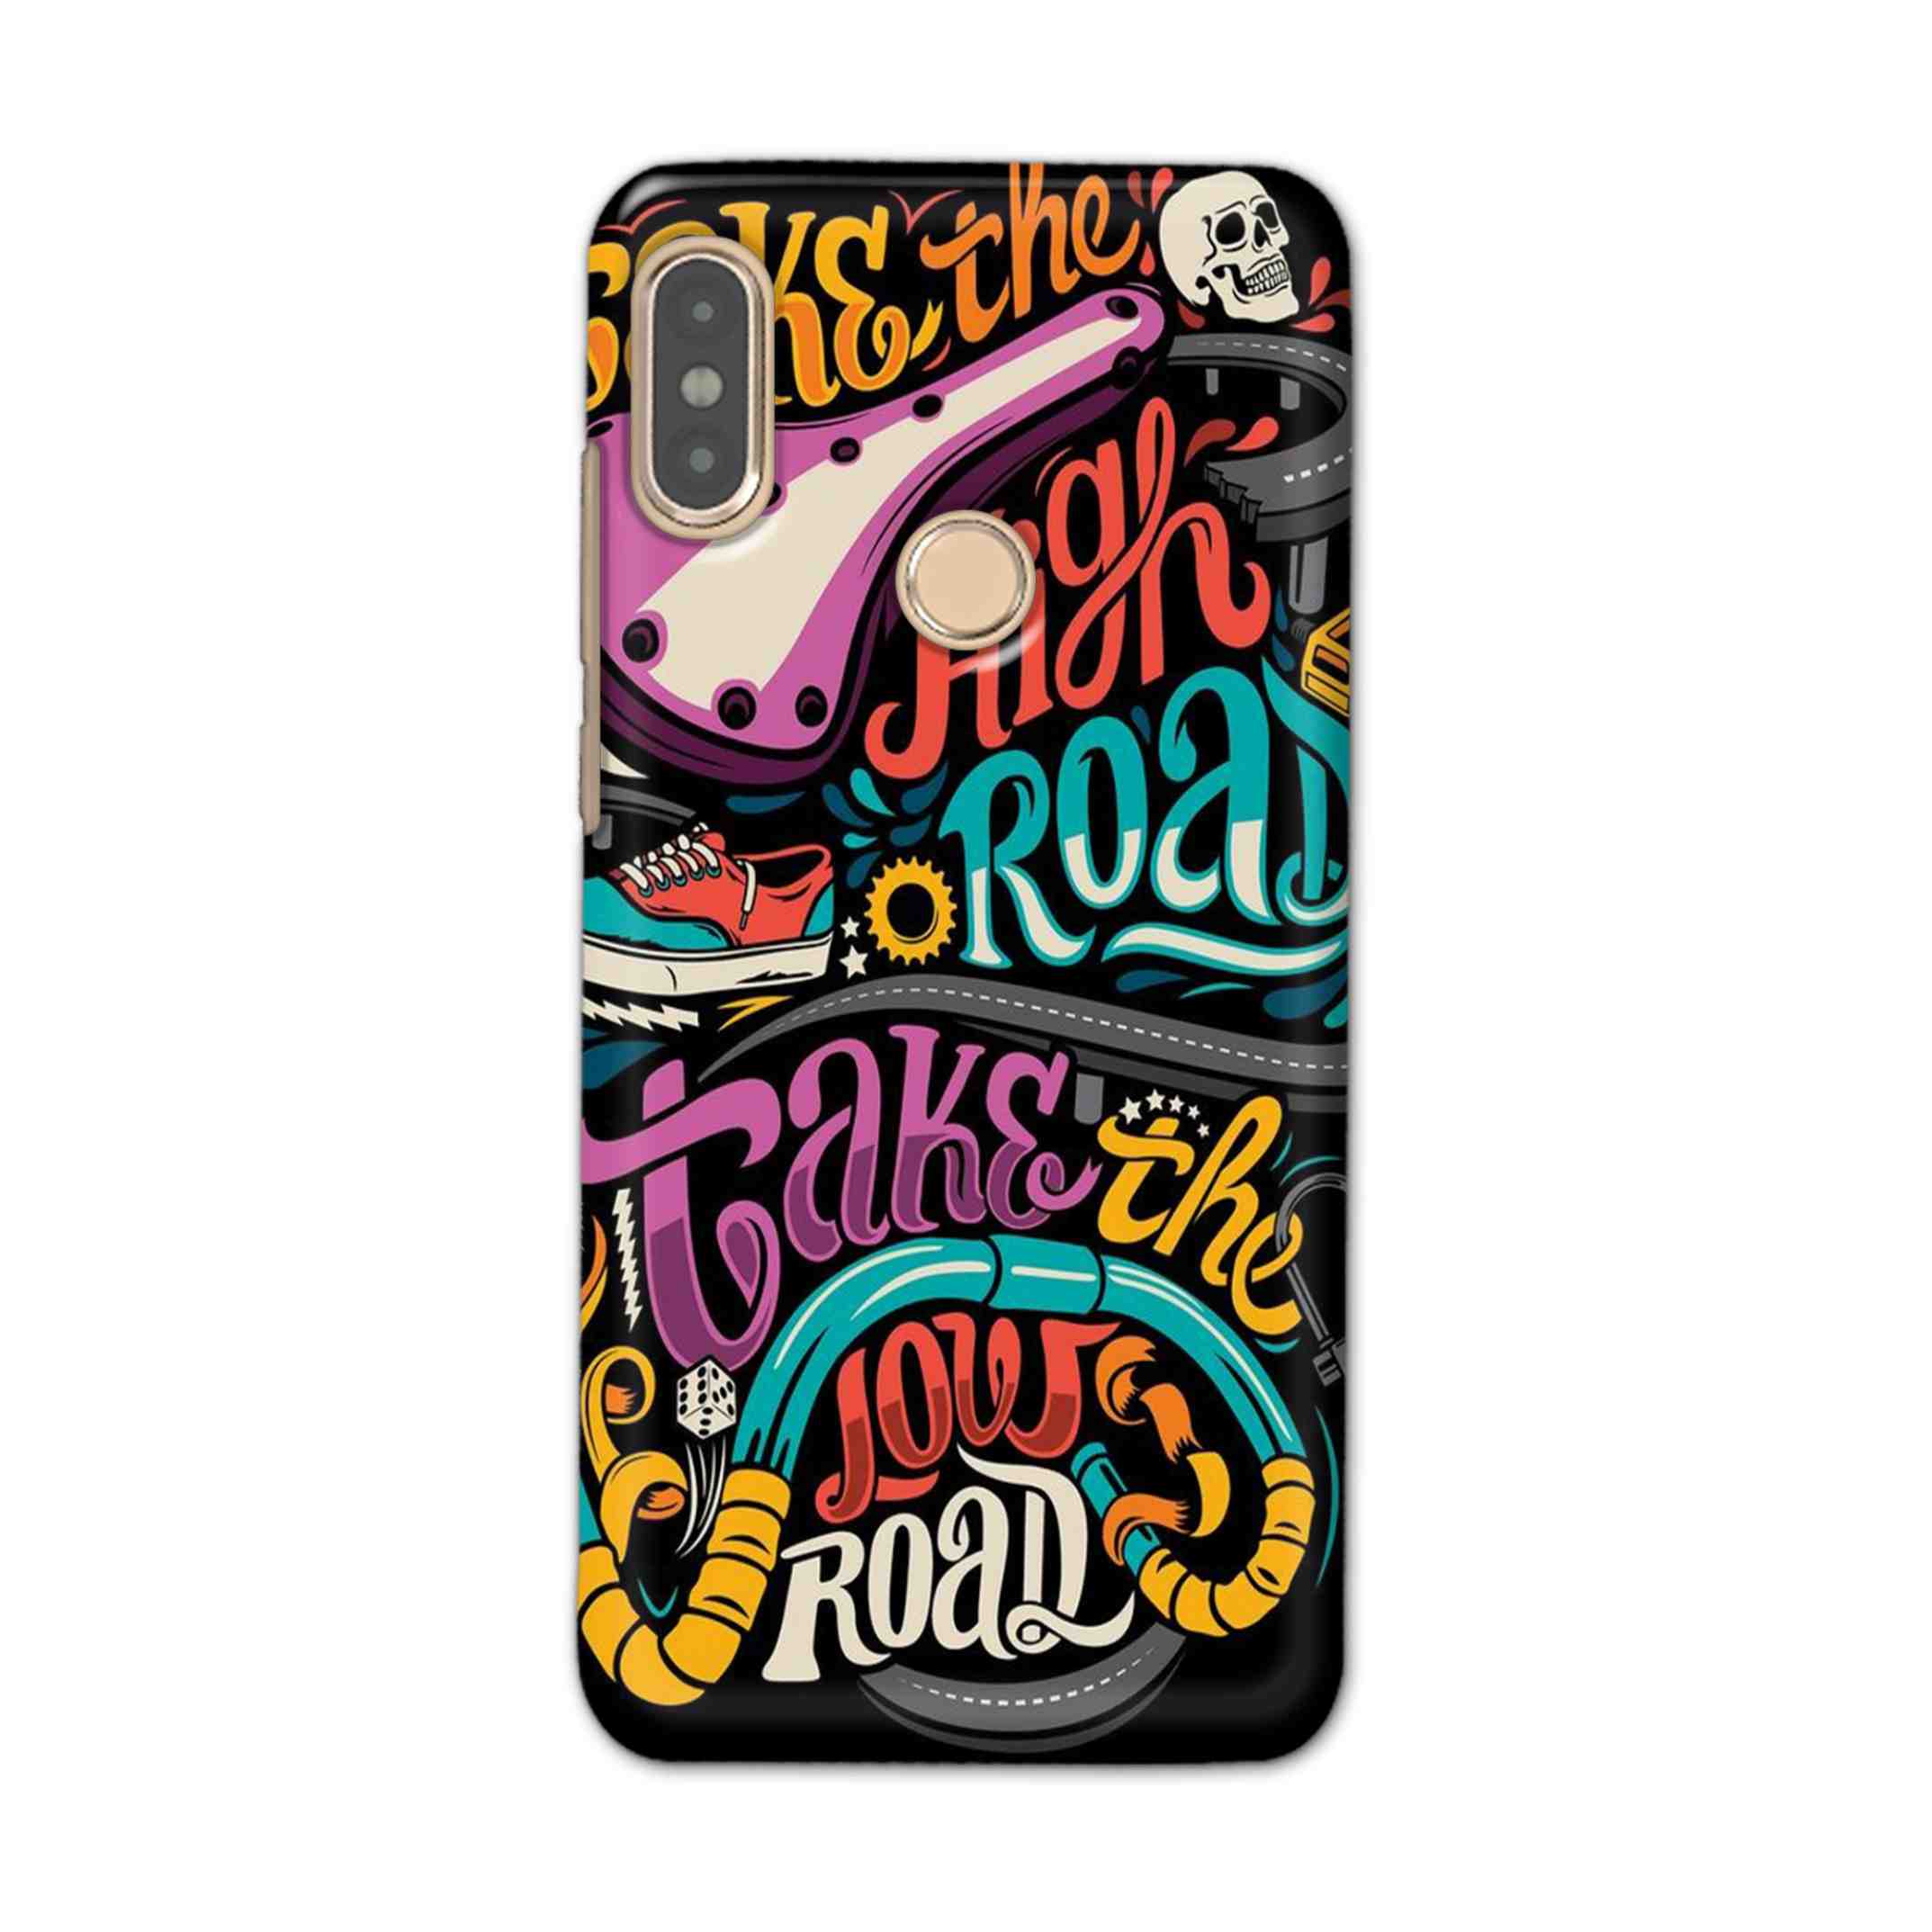 Buy Take The High Road Hard Back Mobile Phone Case Cover For Xiaomi Redmi Note 5 Pro Online